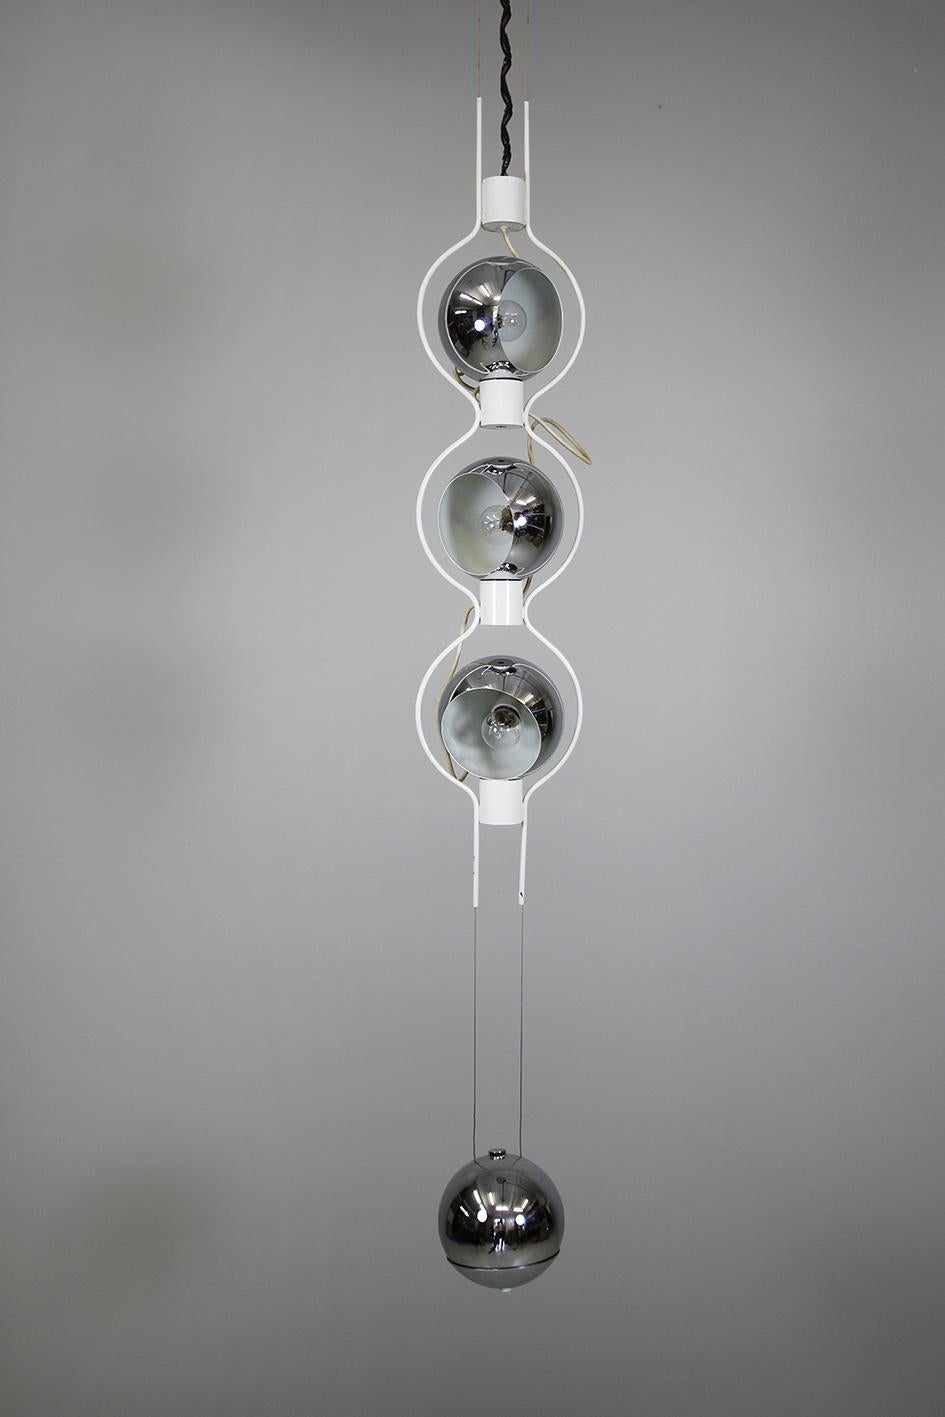 This very rare, complex yet easy ceiling lamp '14071' by Angelo Lelli is made of chrome and white lacquered metal. It has three light sources coming from round, spherical cones. The lamp is being balanced out by a weight also covered in chrome.